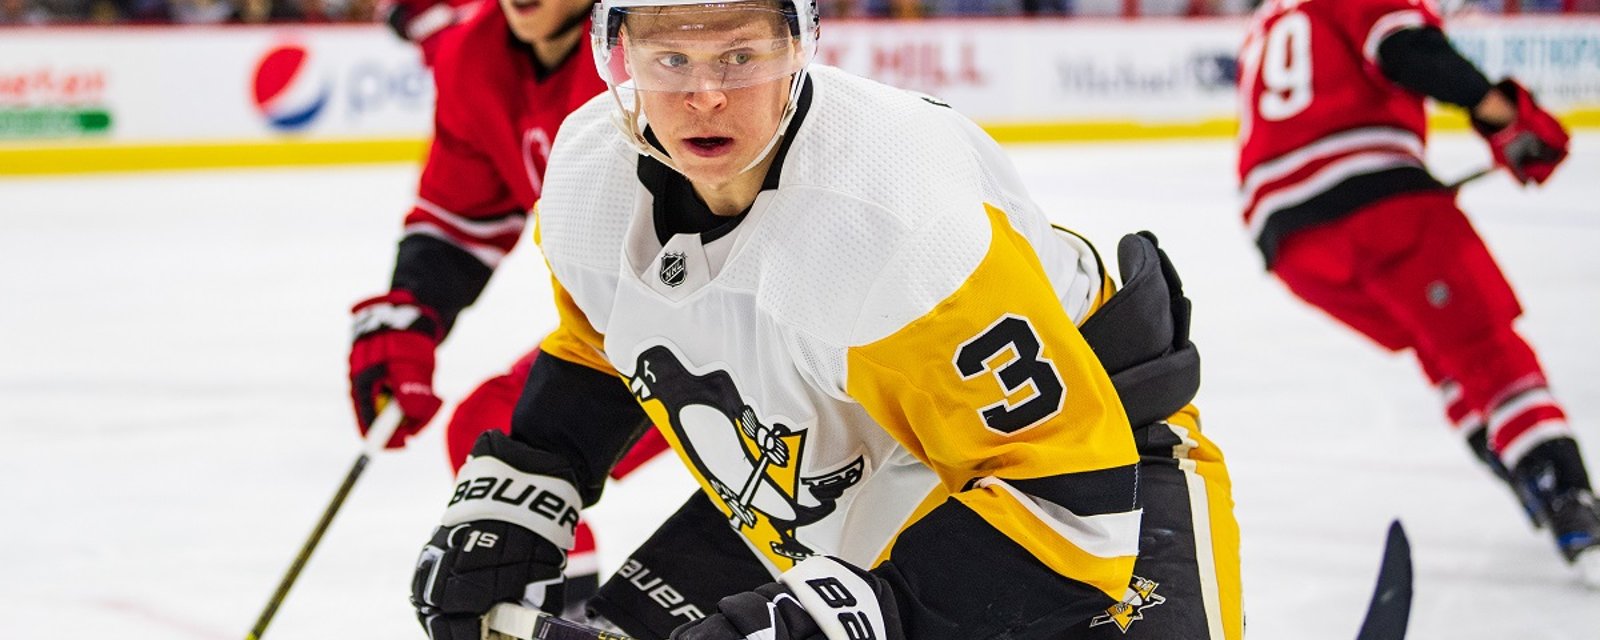 Olli Maatta comments for the first time since being traded.